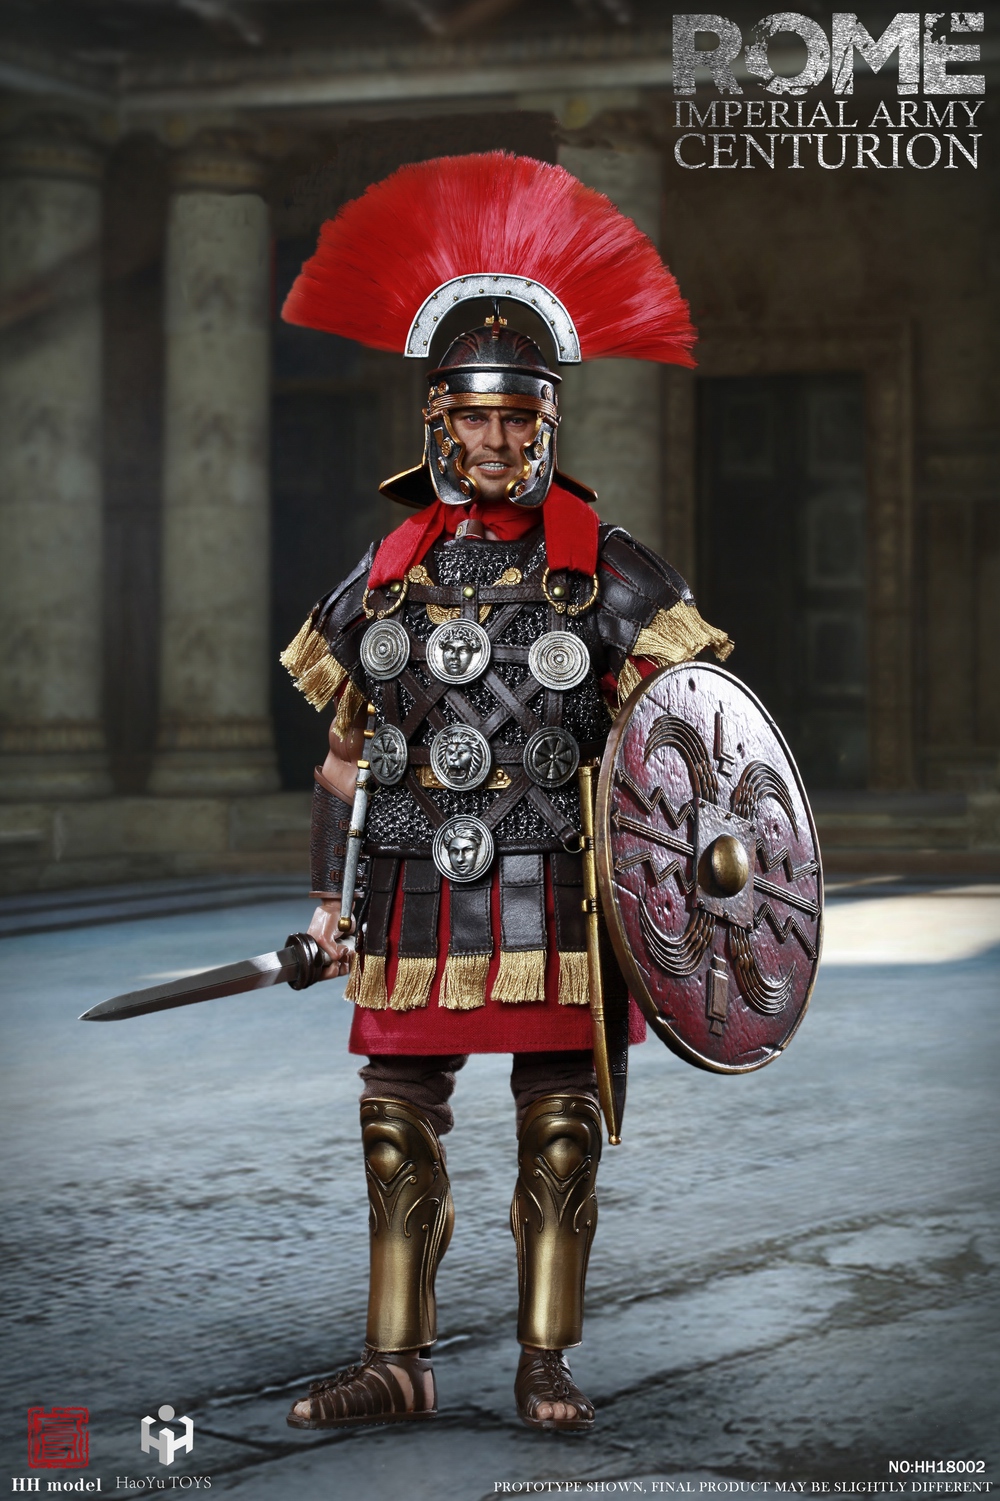 Historical - NEW PRODUCT: HH Model X HaoYuTOYS :1/6 Imperial Army — Centurion Action Figure 12331110